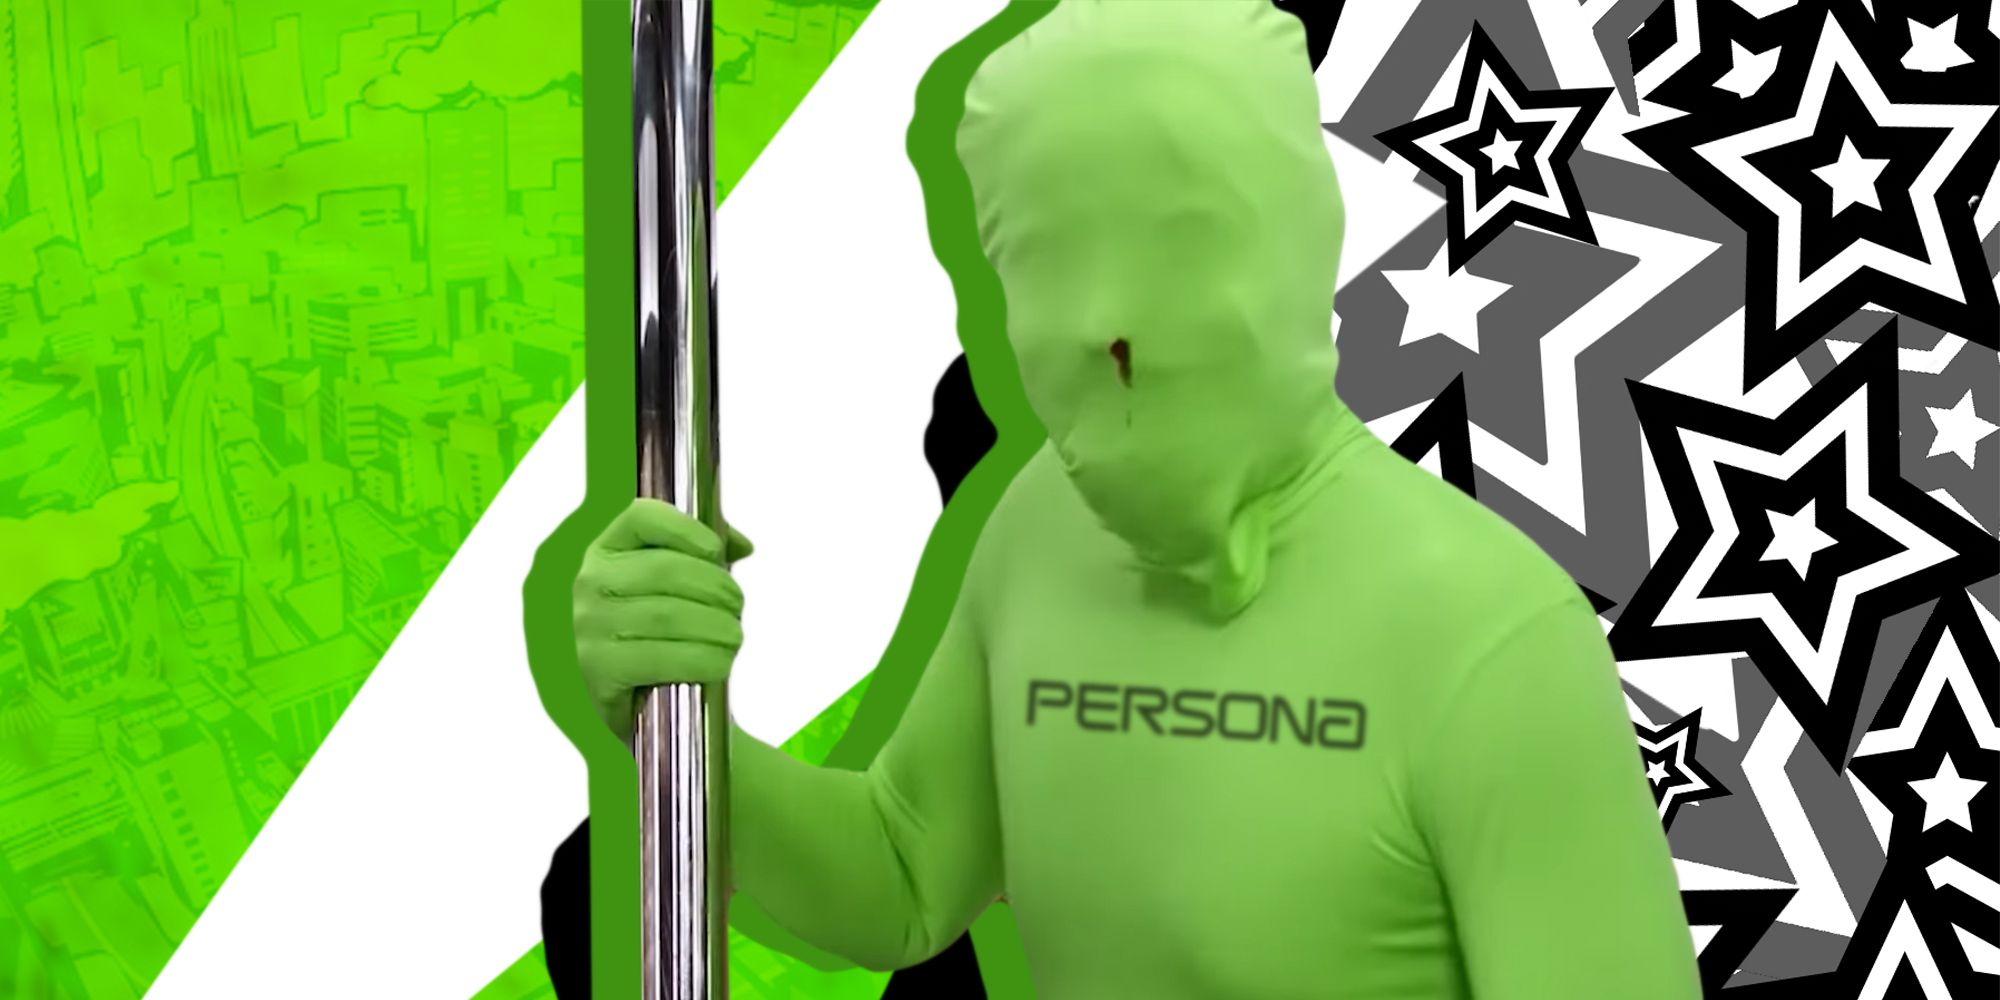 Always Sunny's Green Man with Persona stars in the background